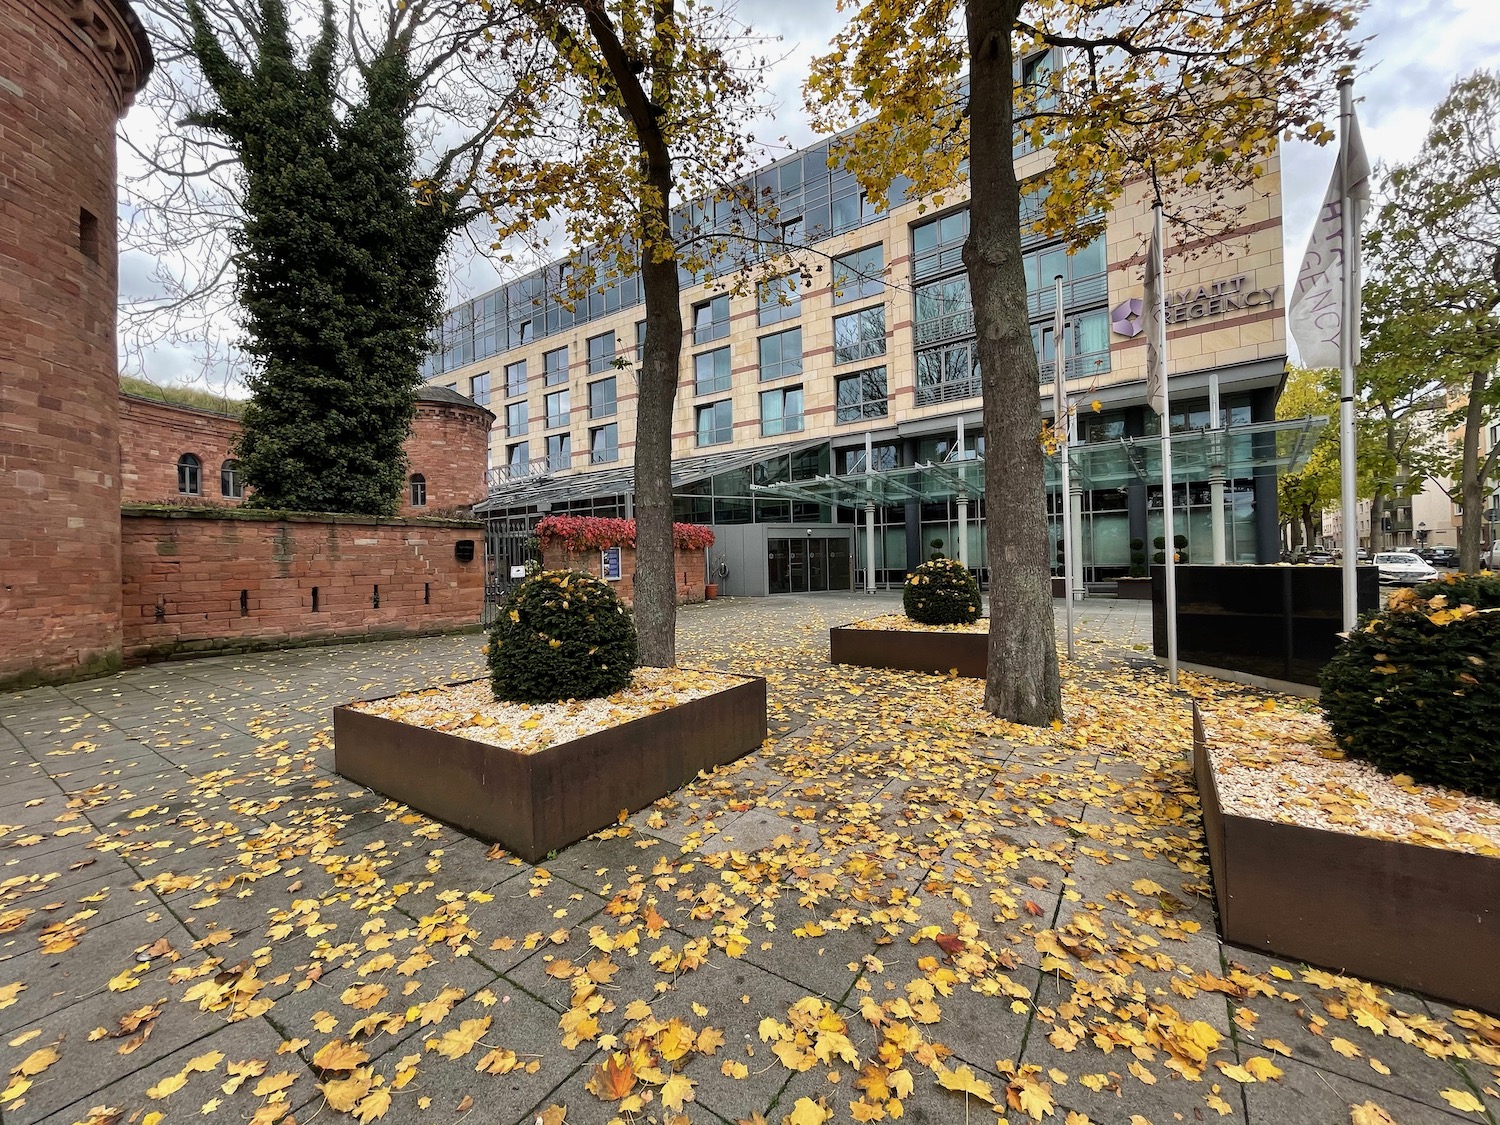 a building with trees and leaves on the ground